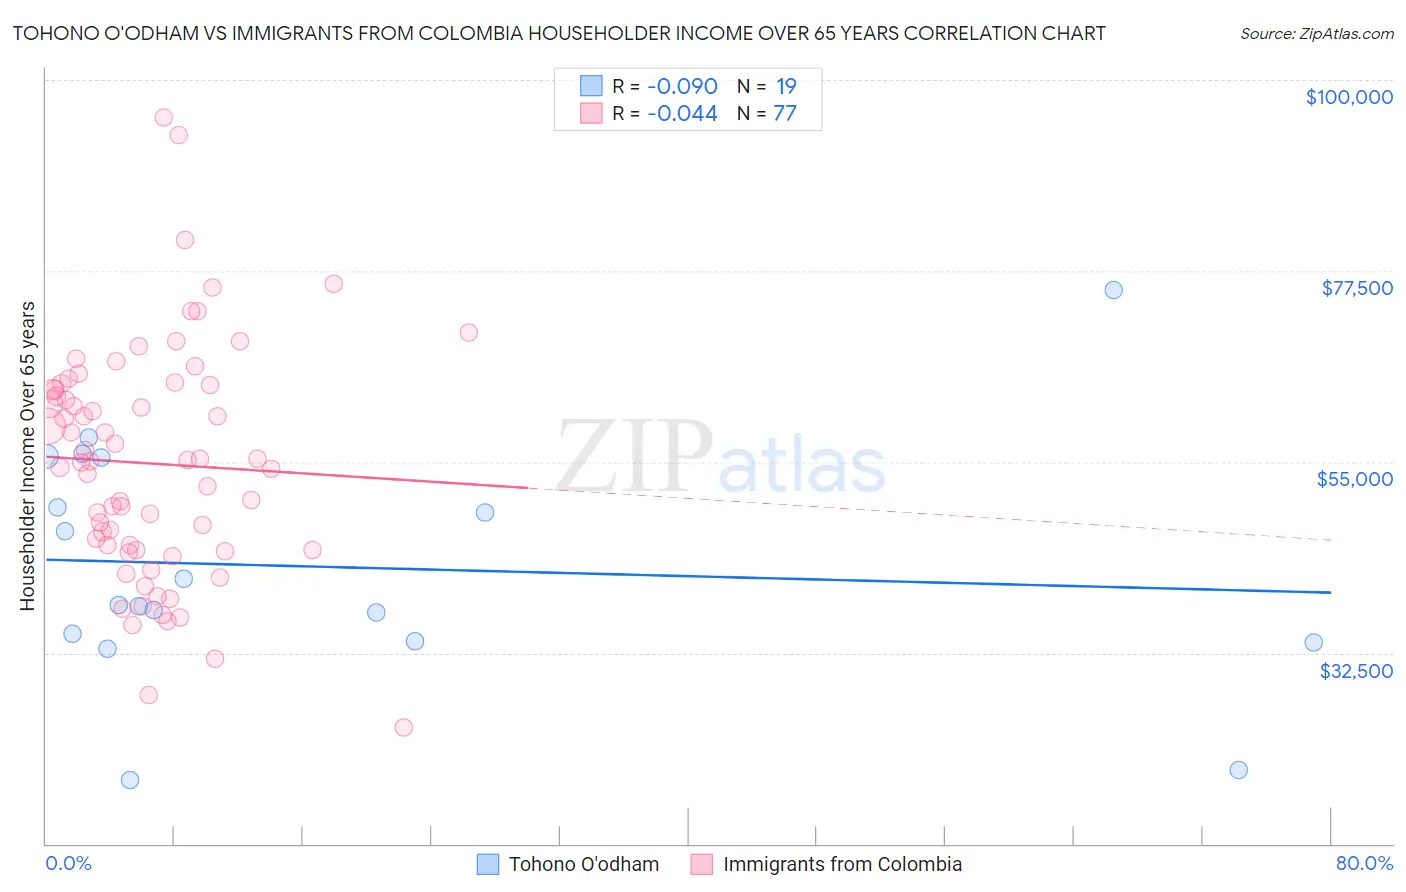 Tohono O'odham vs Immigrants from Colombia Householder Income Over 65 years